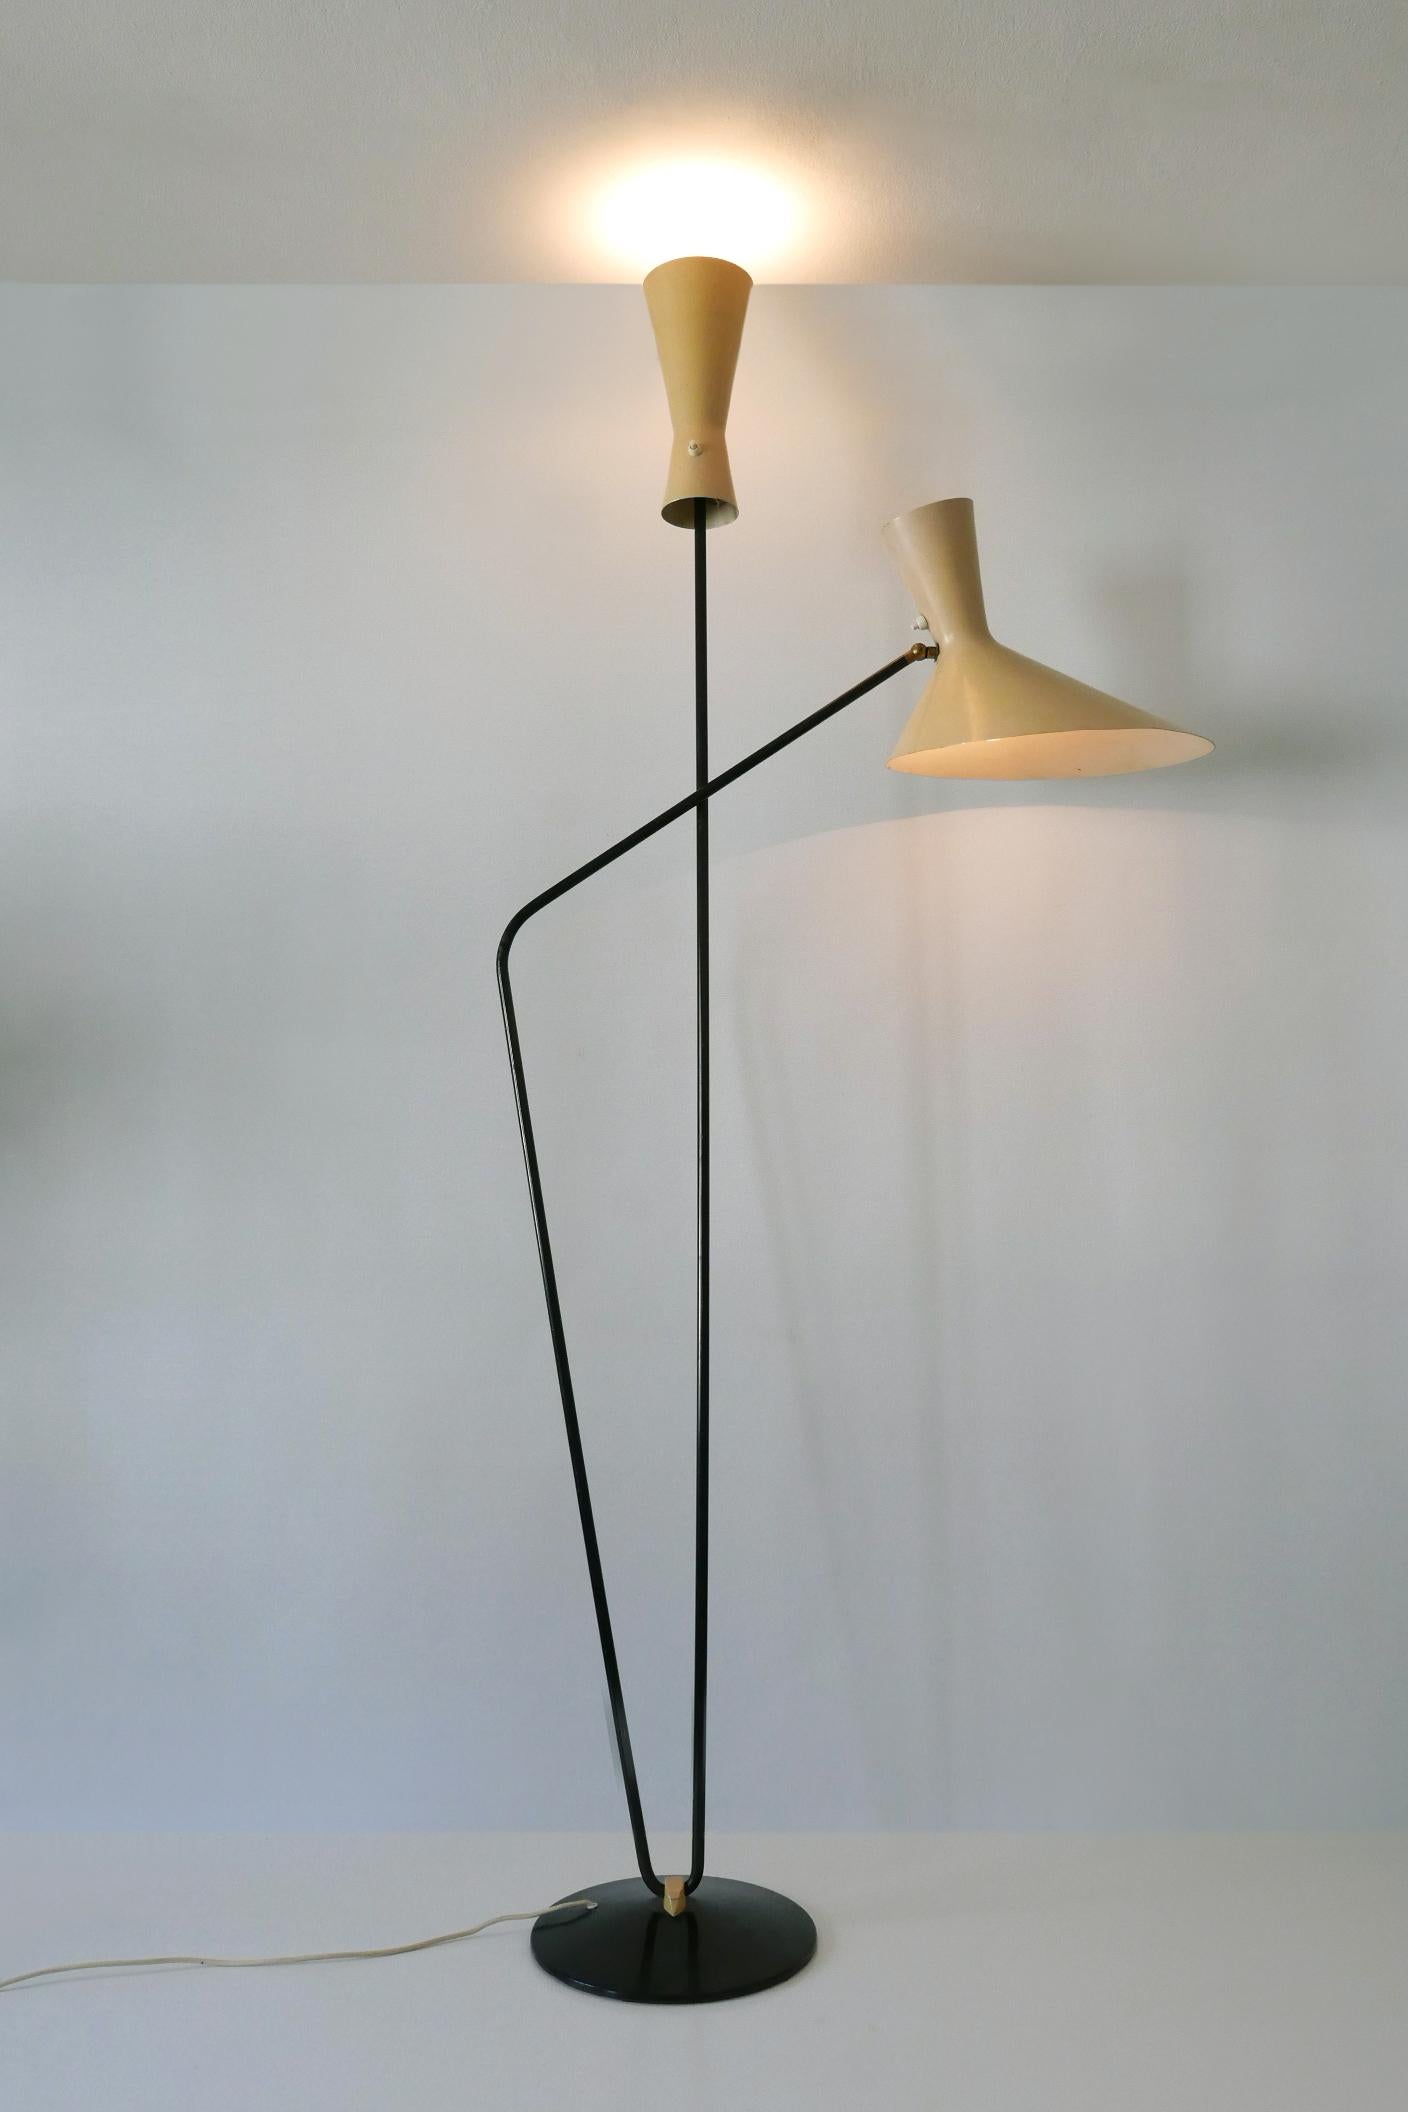 Rare Iconic Mid-Century Modern Floor Lamp by Prof. Carl Moor for BAG Turgi 1950s In Good Condition For Sale In Munich, DE